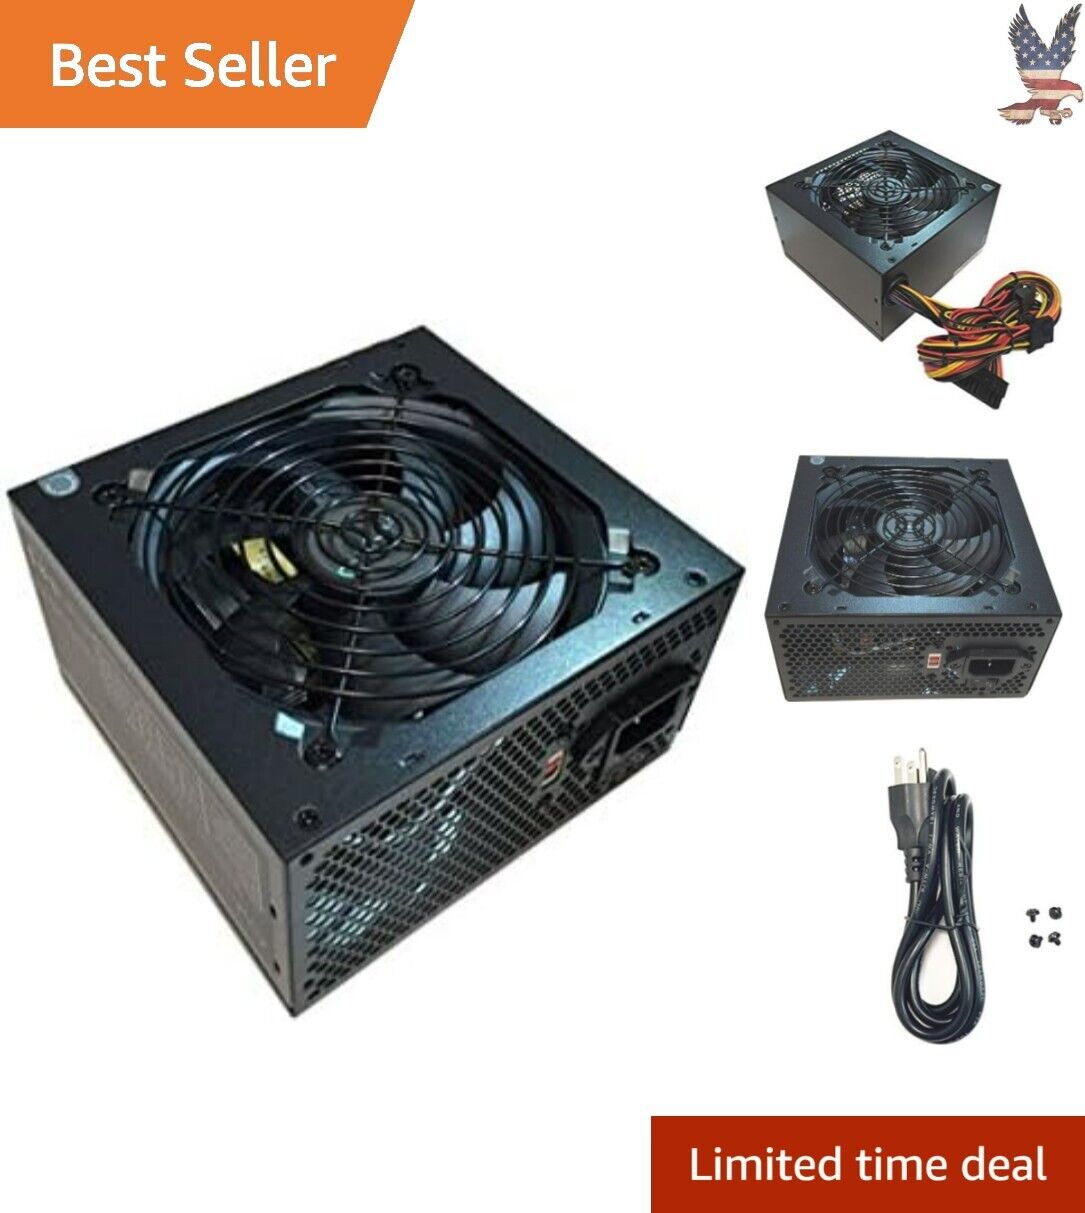 ATX Power Supply - Highly Auto-Thermally Controlled Smart Fan - Efficient